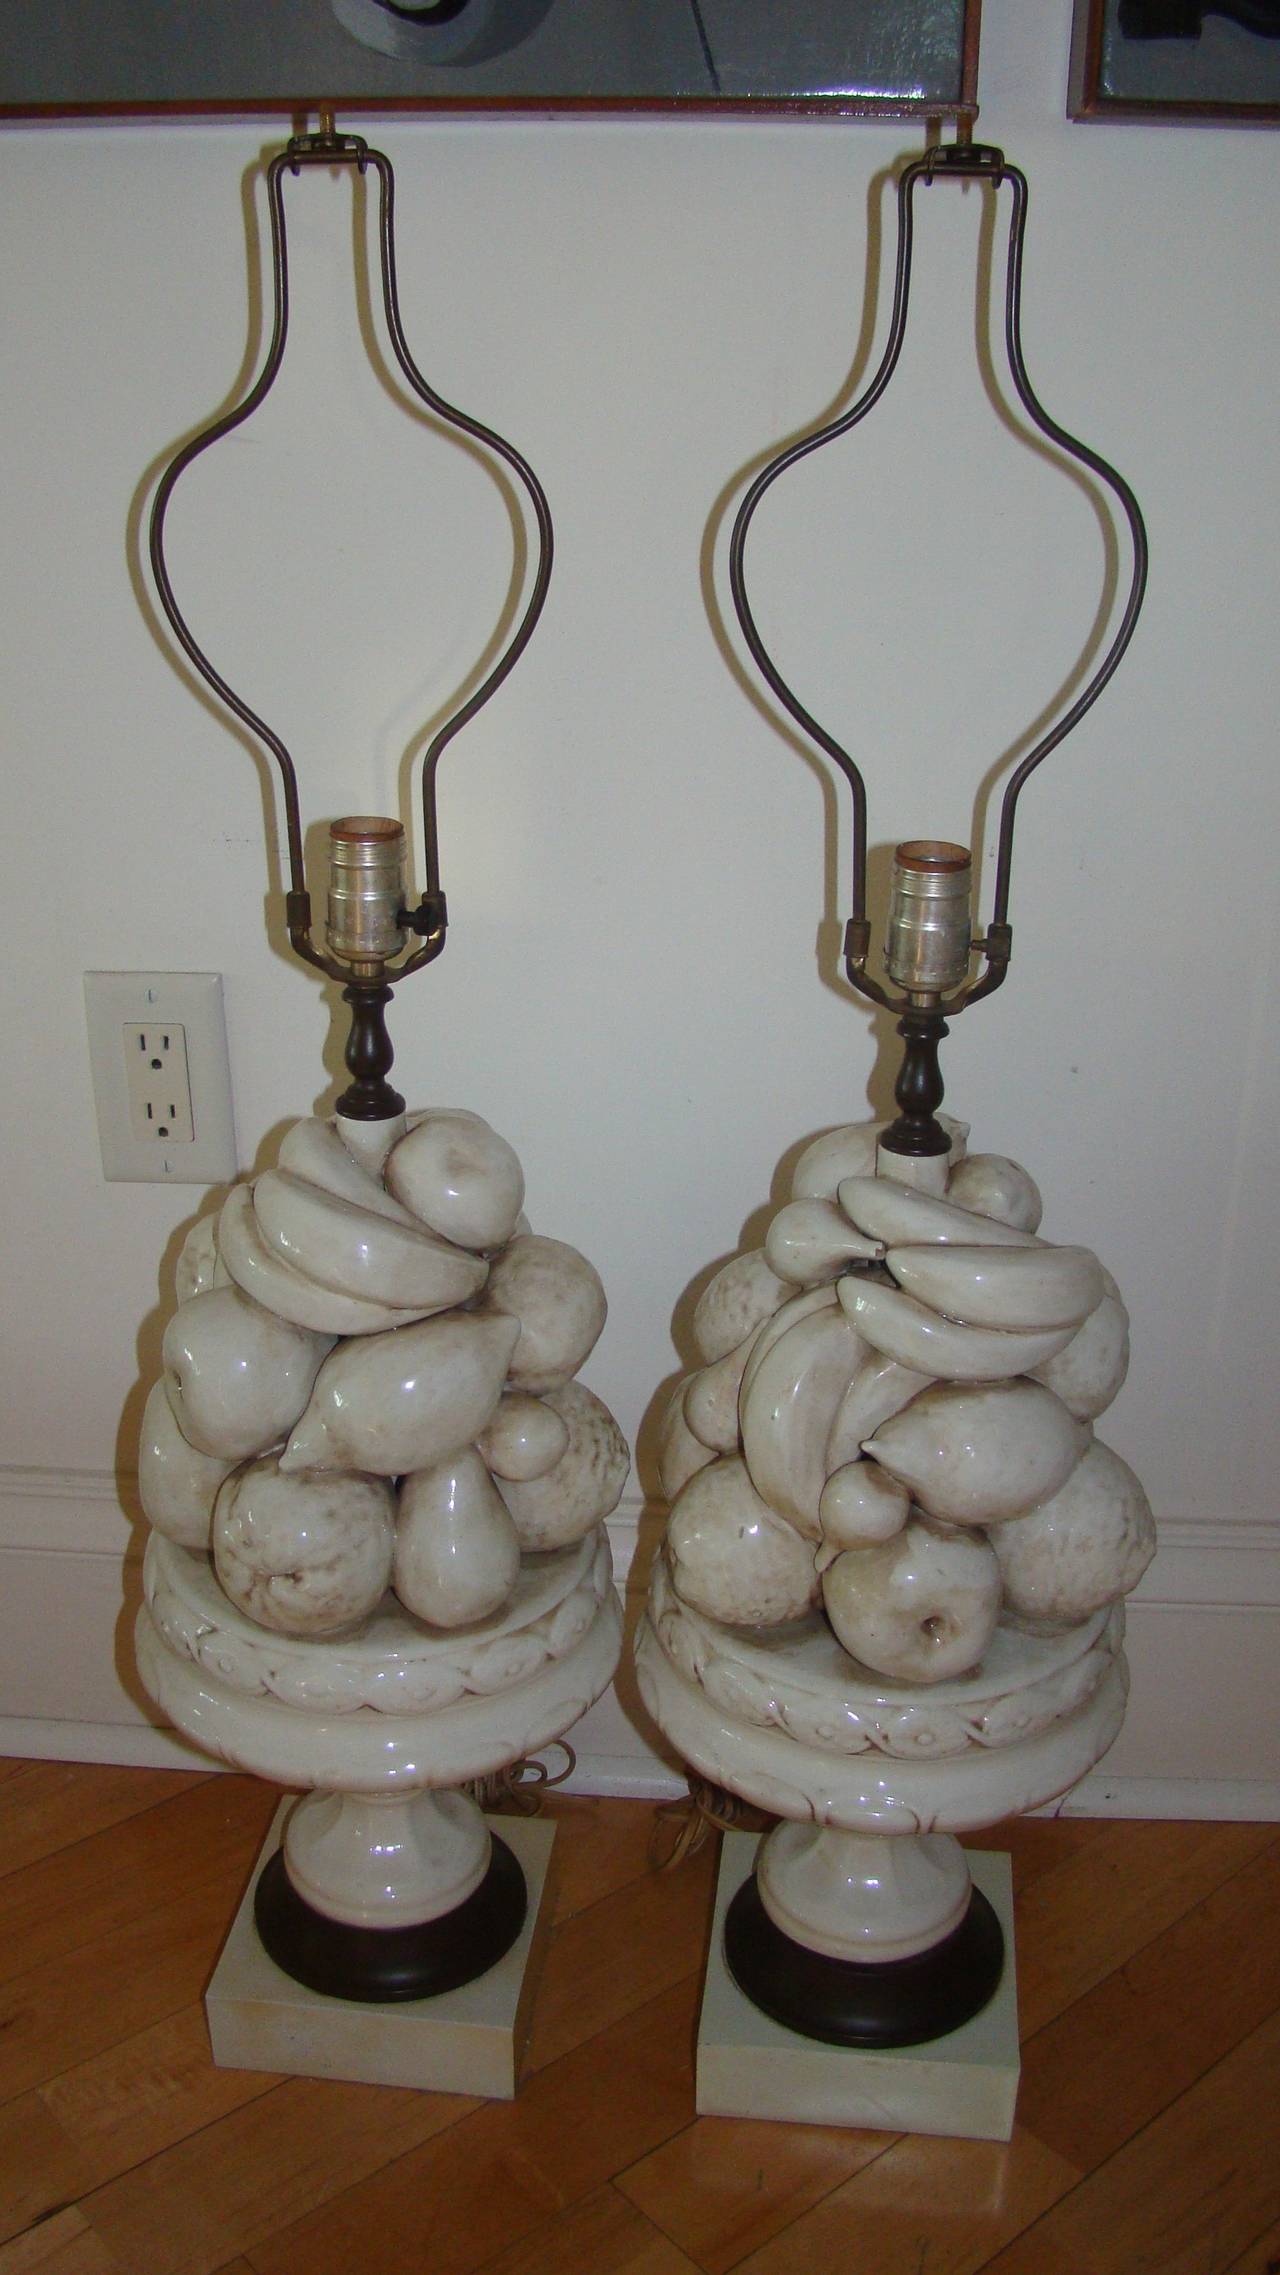 Exceptional pair of matching Italian pottery or ceramic fruit bowl table lamps. Each is comprised of a sculptural stack of fruit in white pottery form. Signed on the inside 